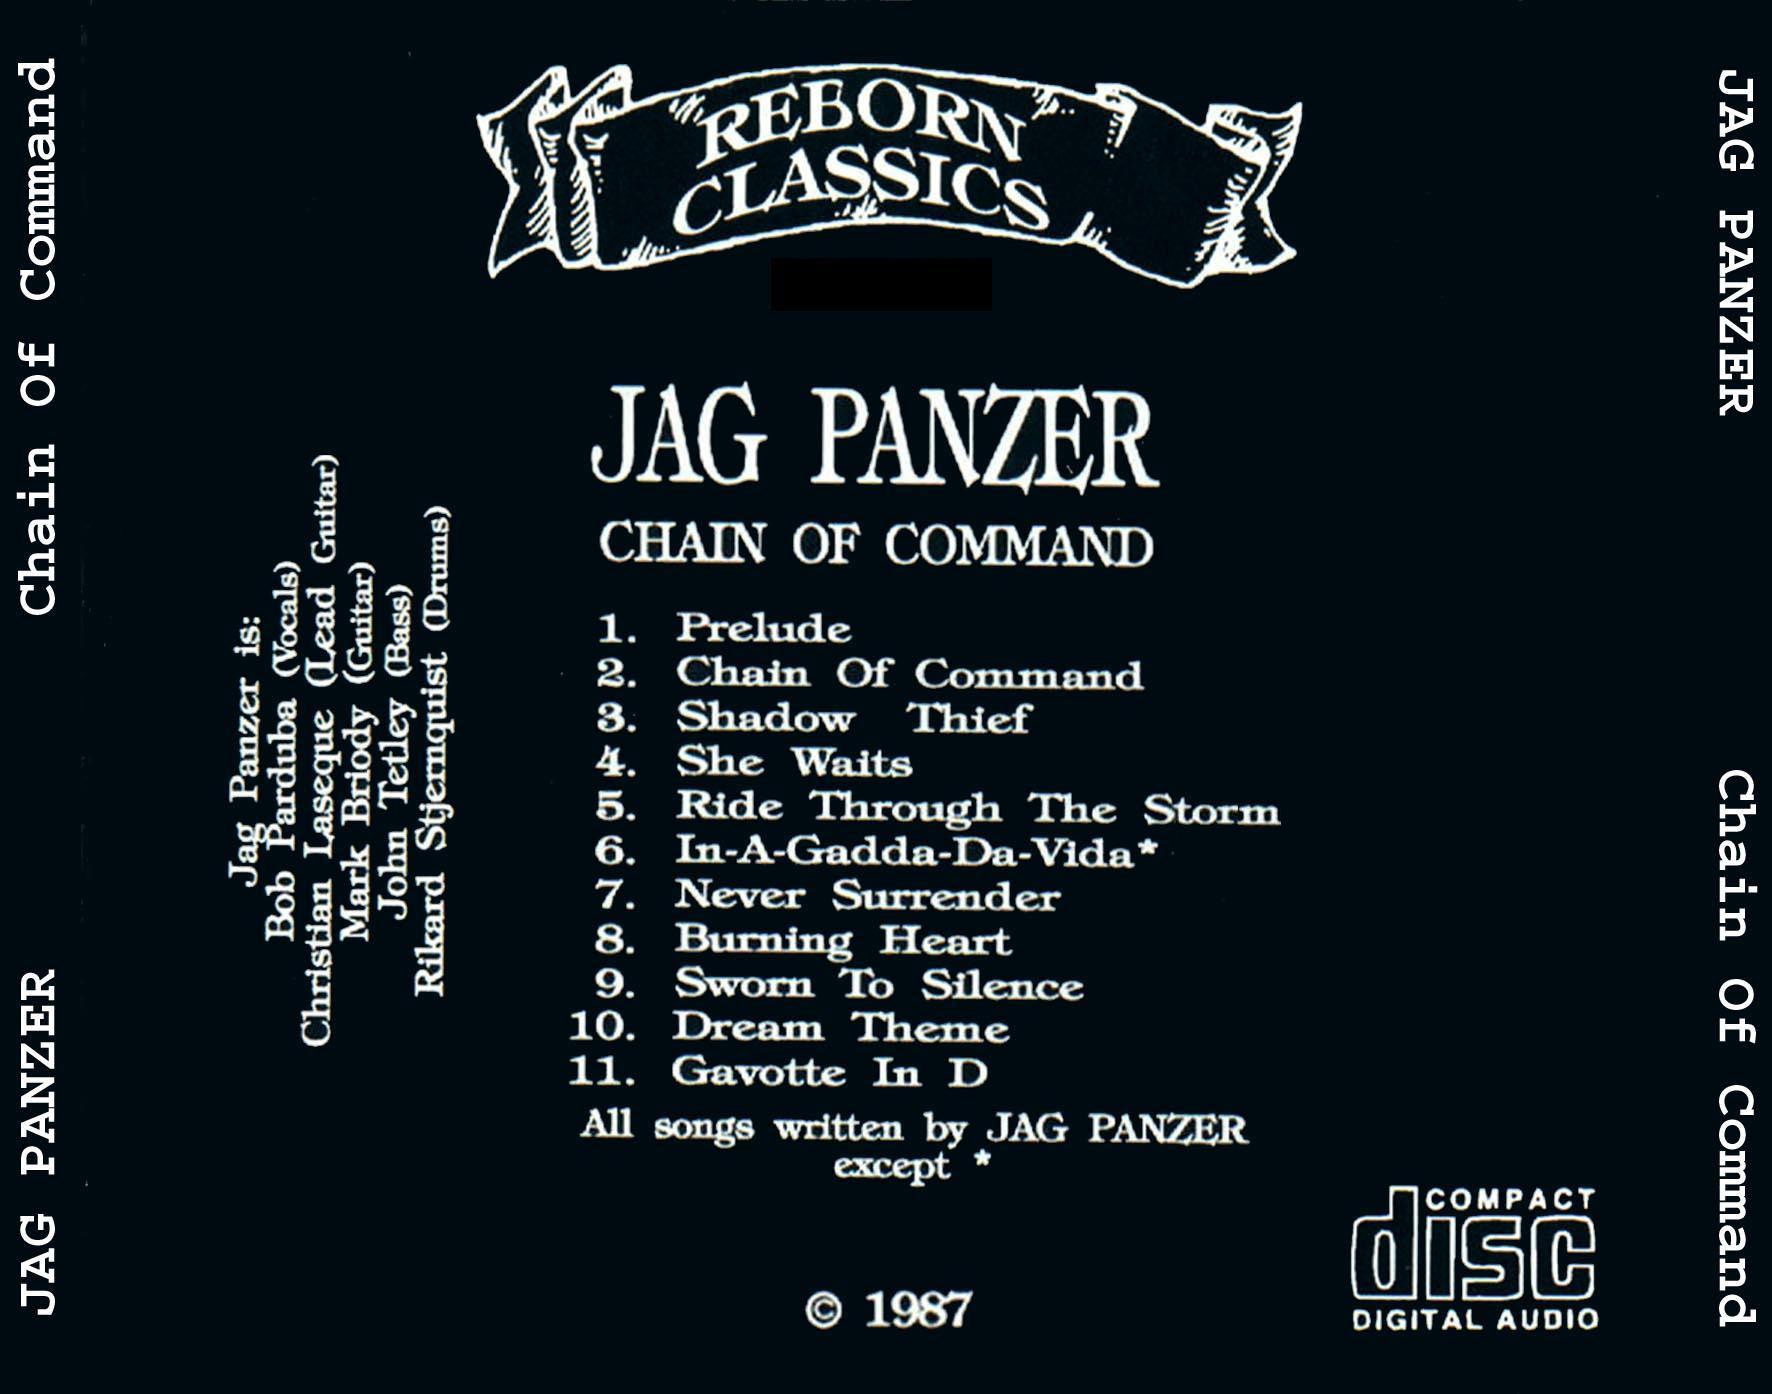 jag panzer chain of command 1987 back 